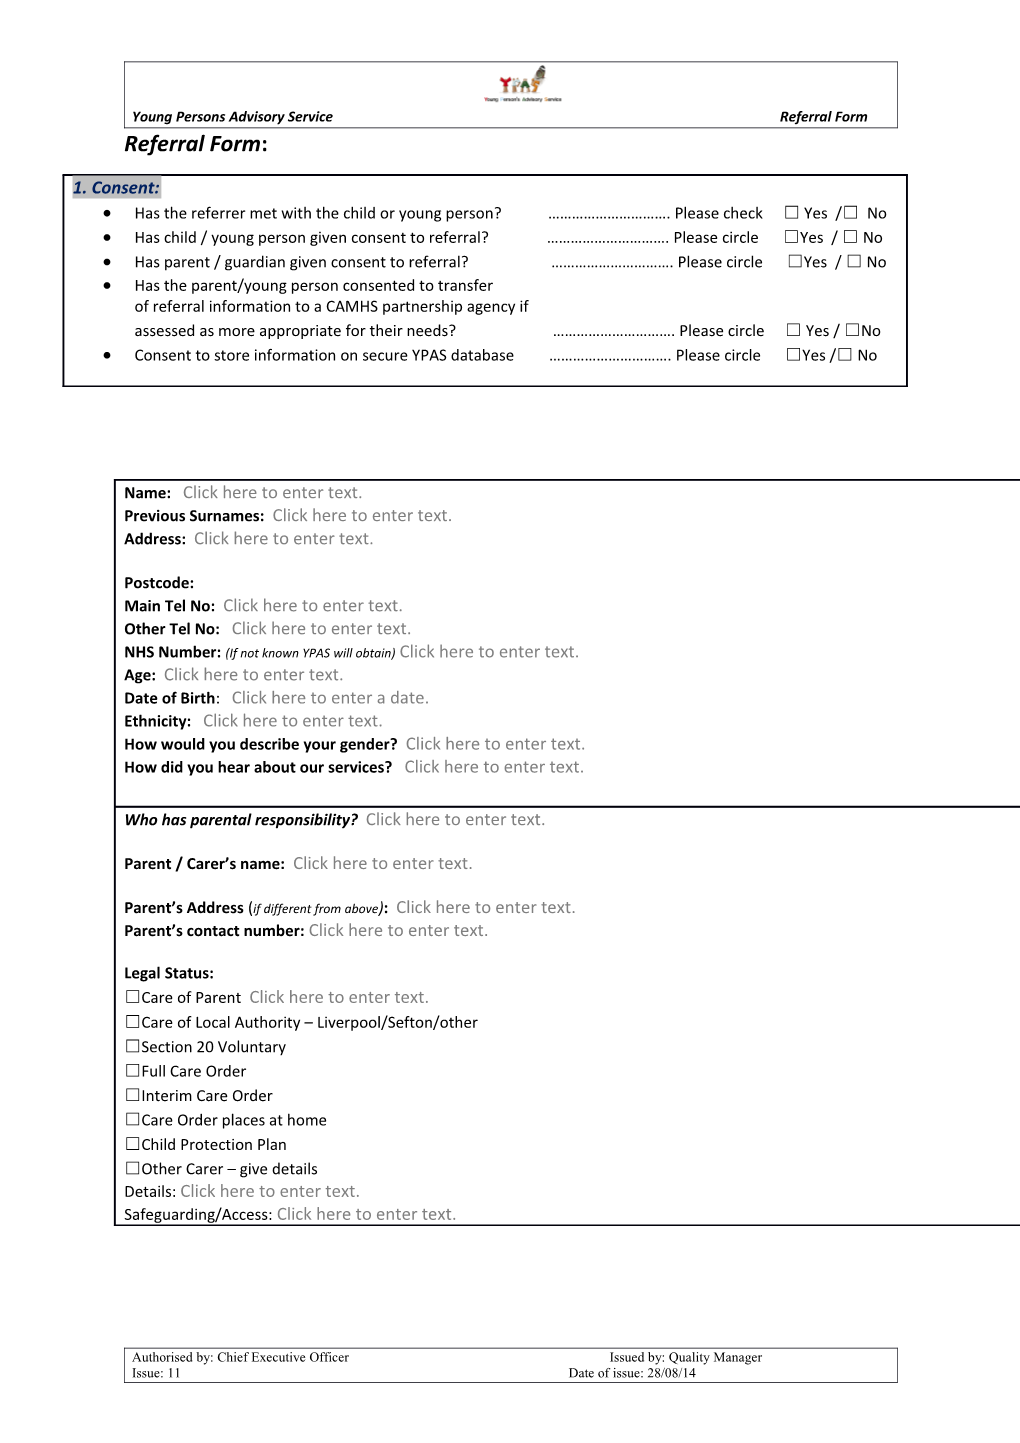 Young Persons Advisory Service Referral Form